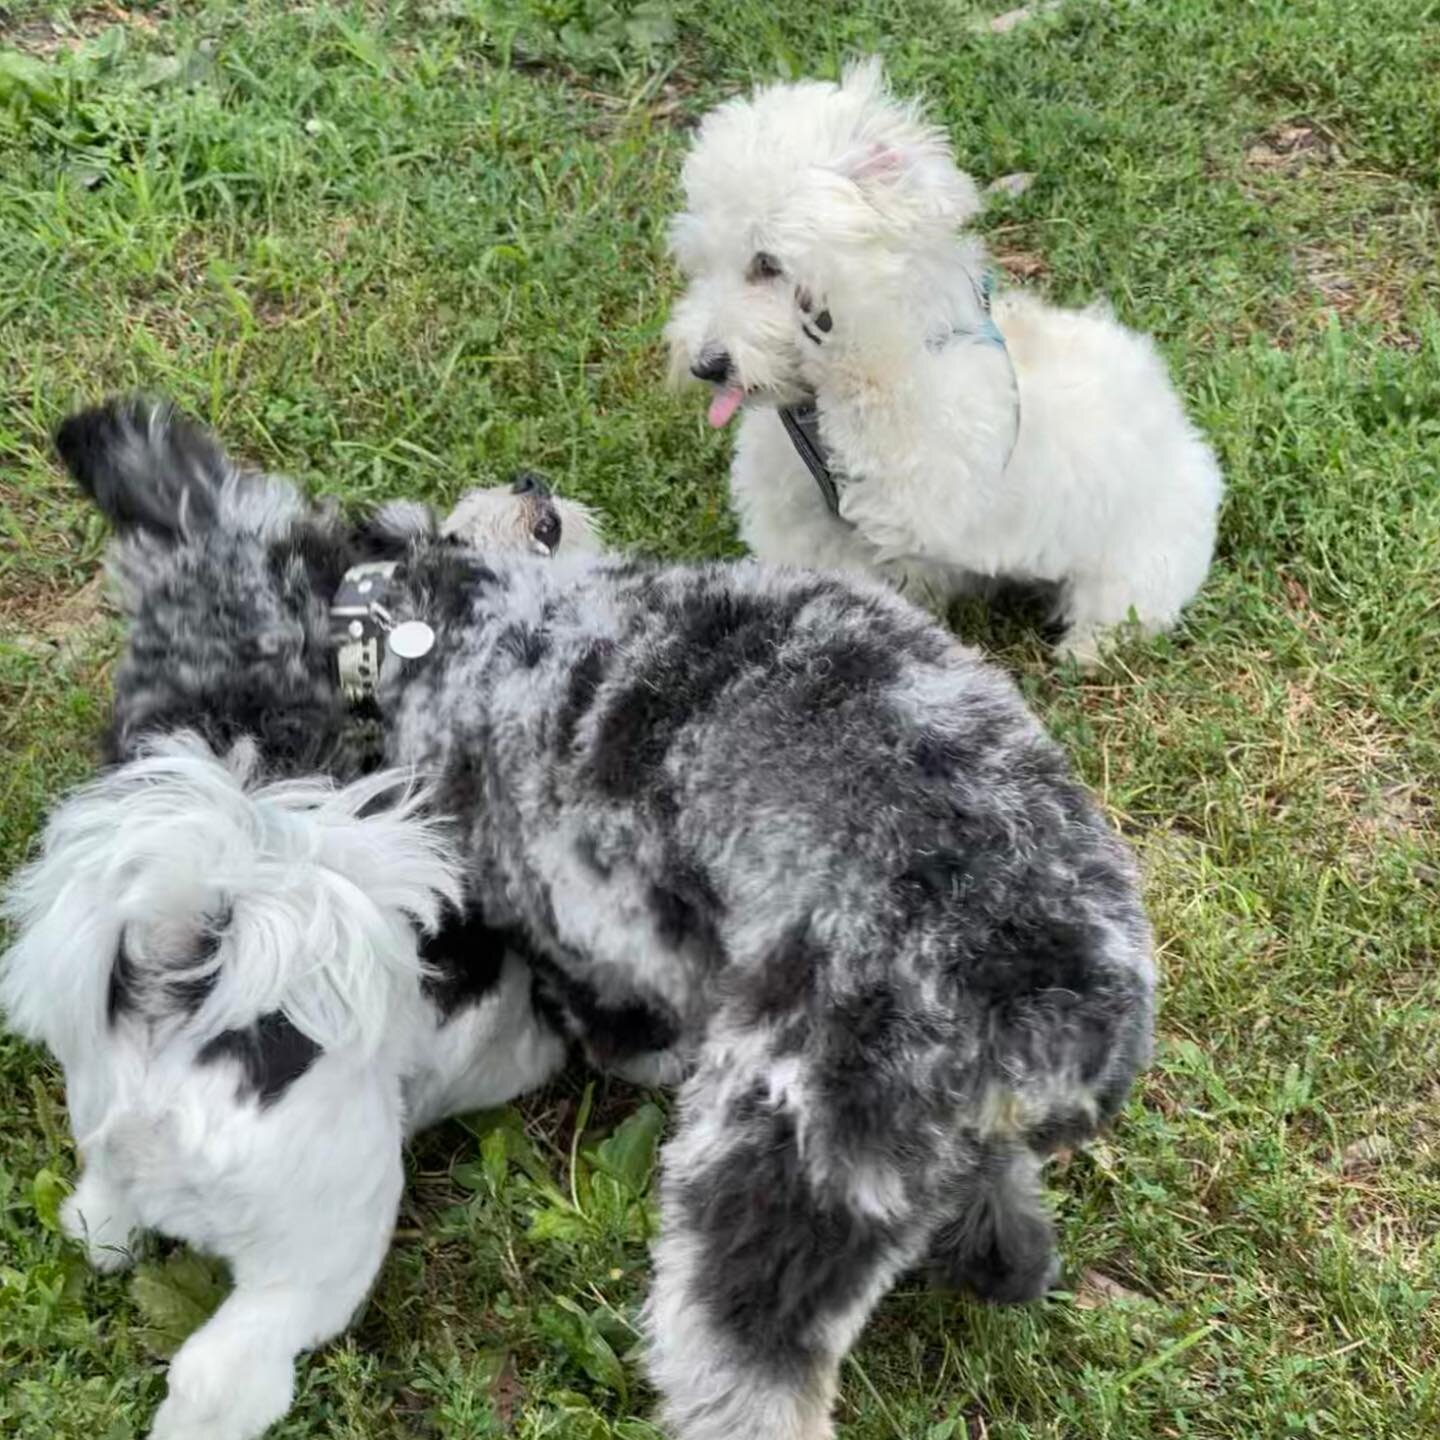 Small dog throw down today!!❤️❤️
Bunny, Archie and Boomer

#bffs #smalldogs #pals #smalldogsofinstagram #exercise #doglovers #dog #dogsofinstagram #pets #petstagram #doglover #dogsofinsta #dogsofig